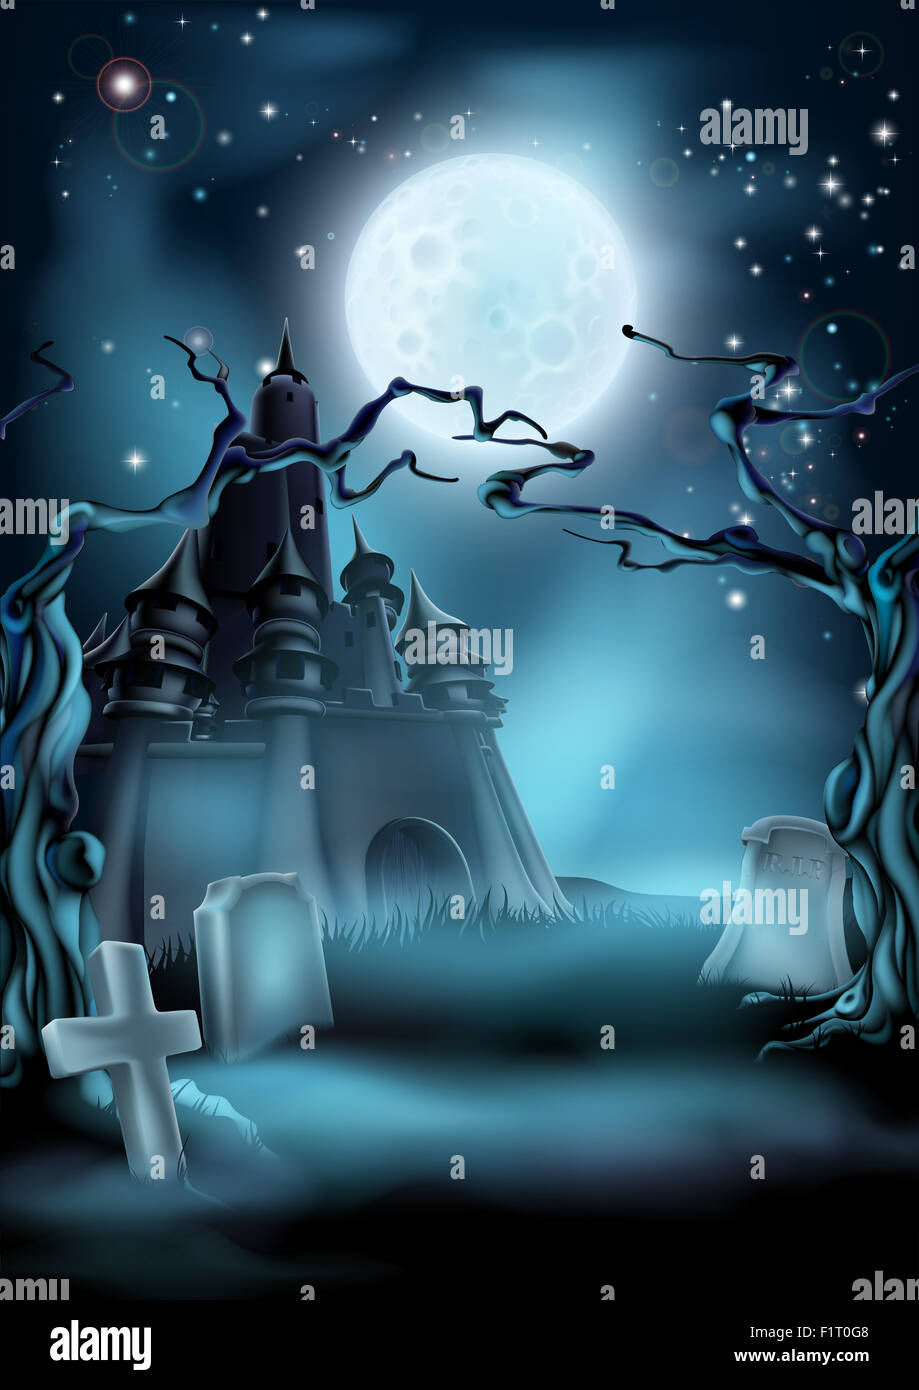 Halloween scary castle graveyard background with a spooky haunted castle, spooky trees and graves and a full moon Stock Photo